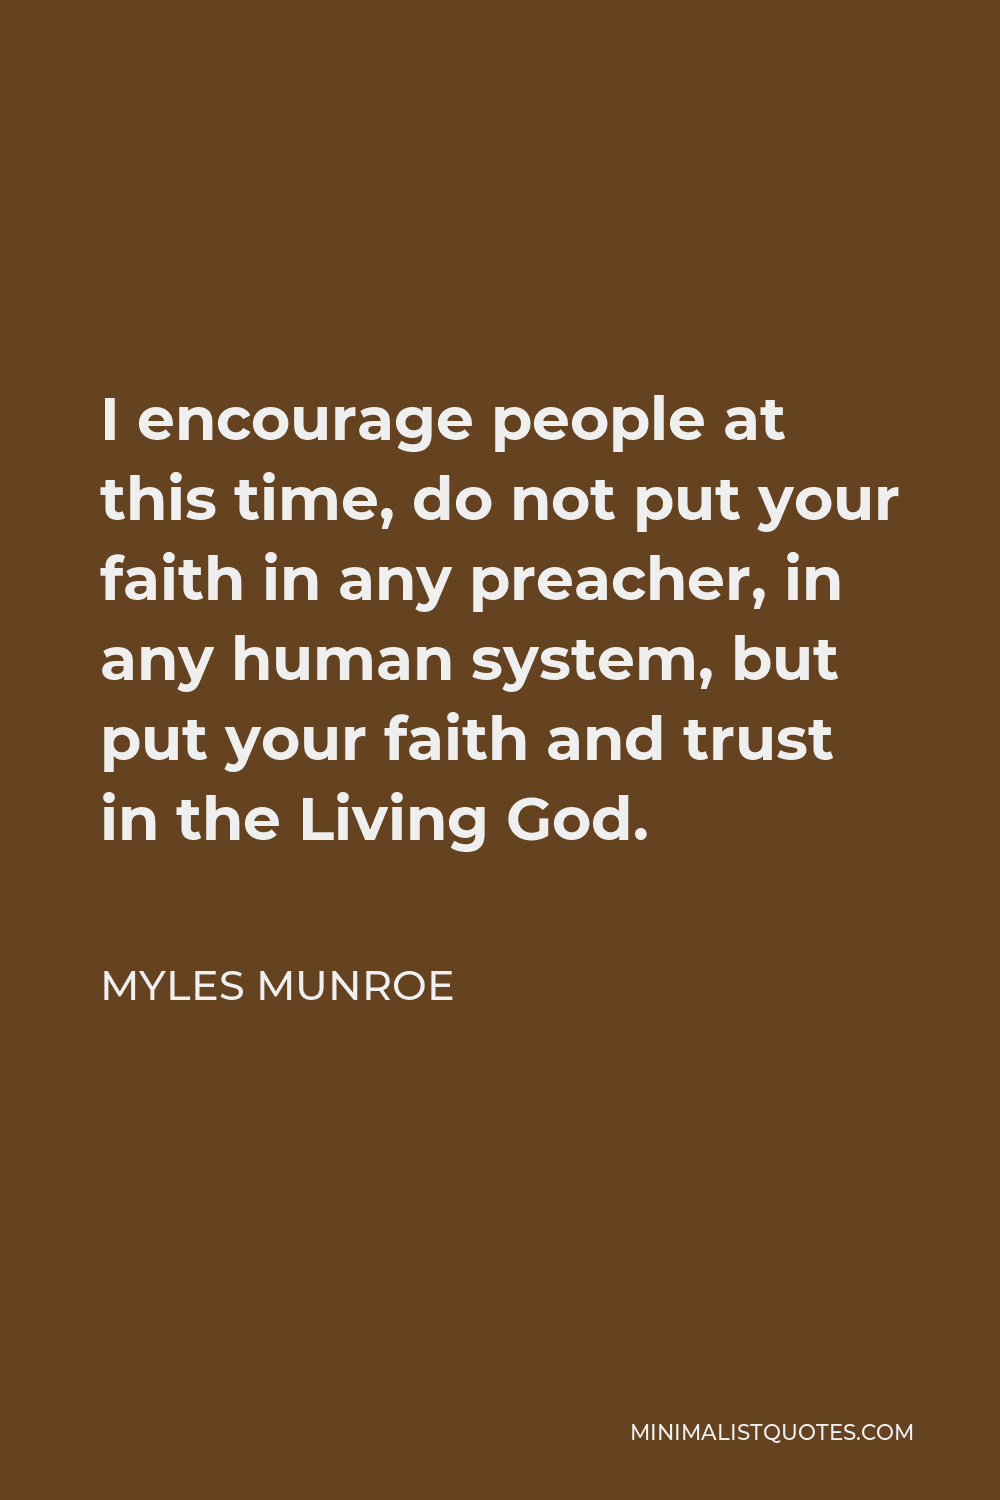 Myles Munroe Quote - I encourage people at this time, do not put your faith in any preacher, in any human system, but put your faith and trust in the Living God.